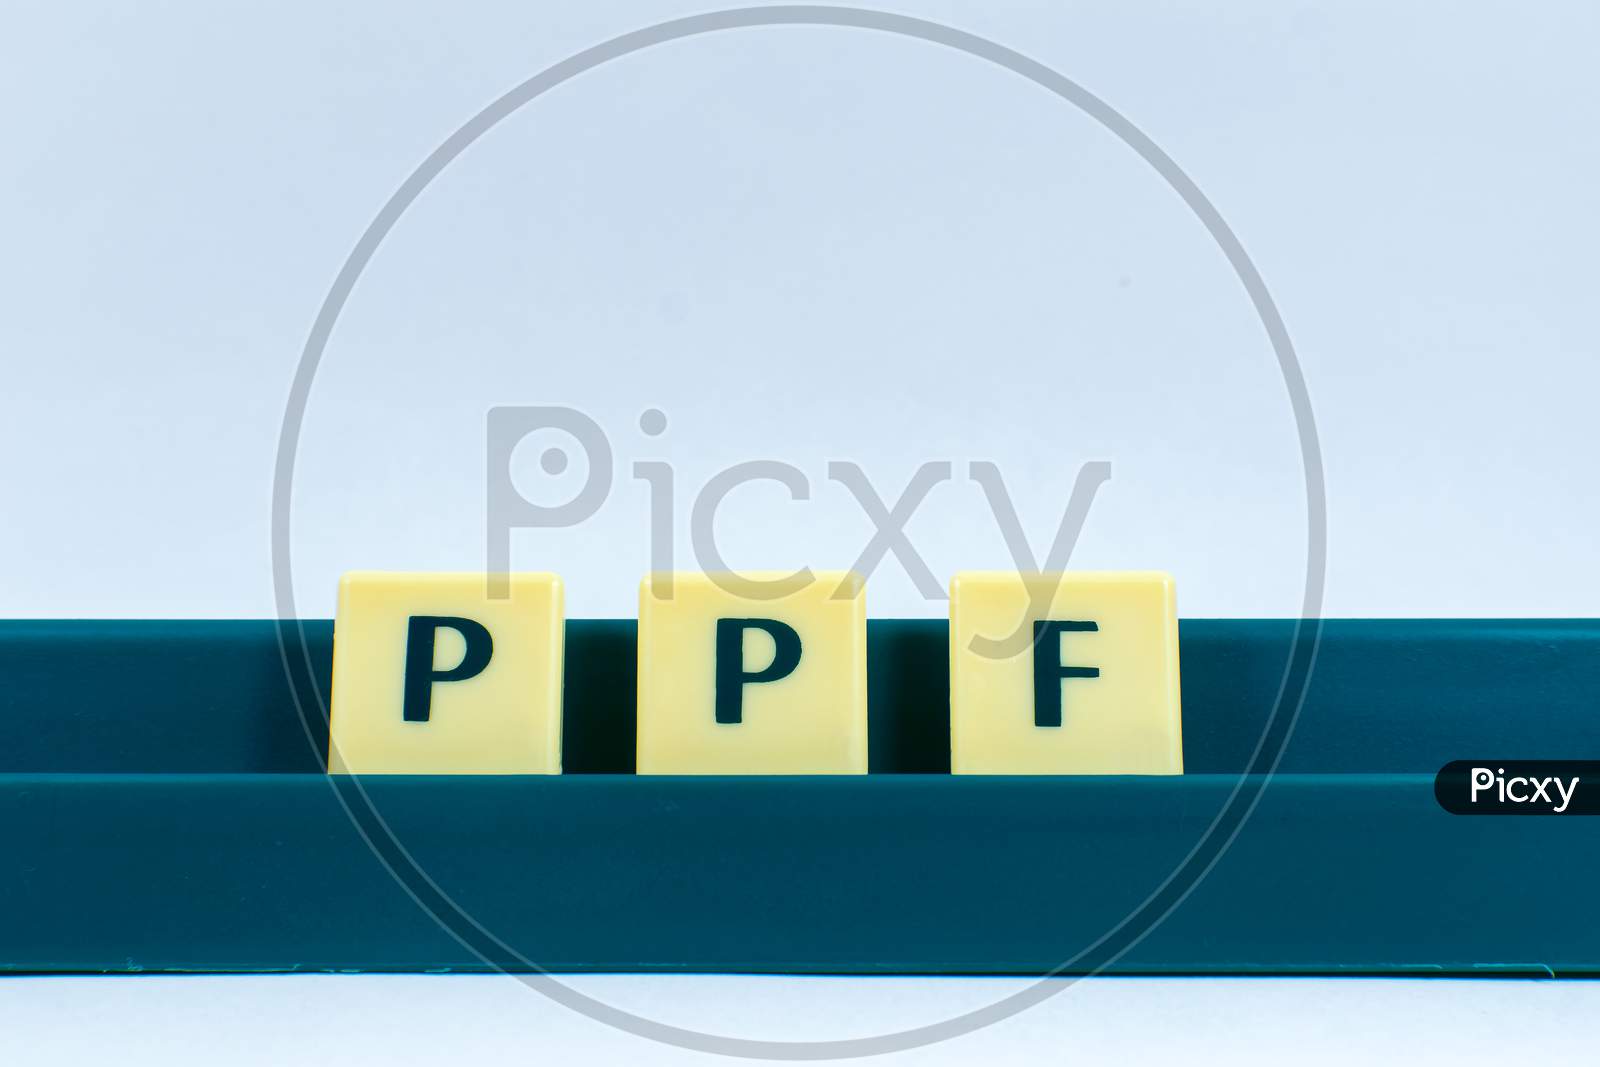 Public provident fund or PPF  word design image for stock market or any type monetary transaction by block letter for various purposes financial work